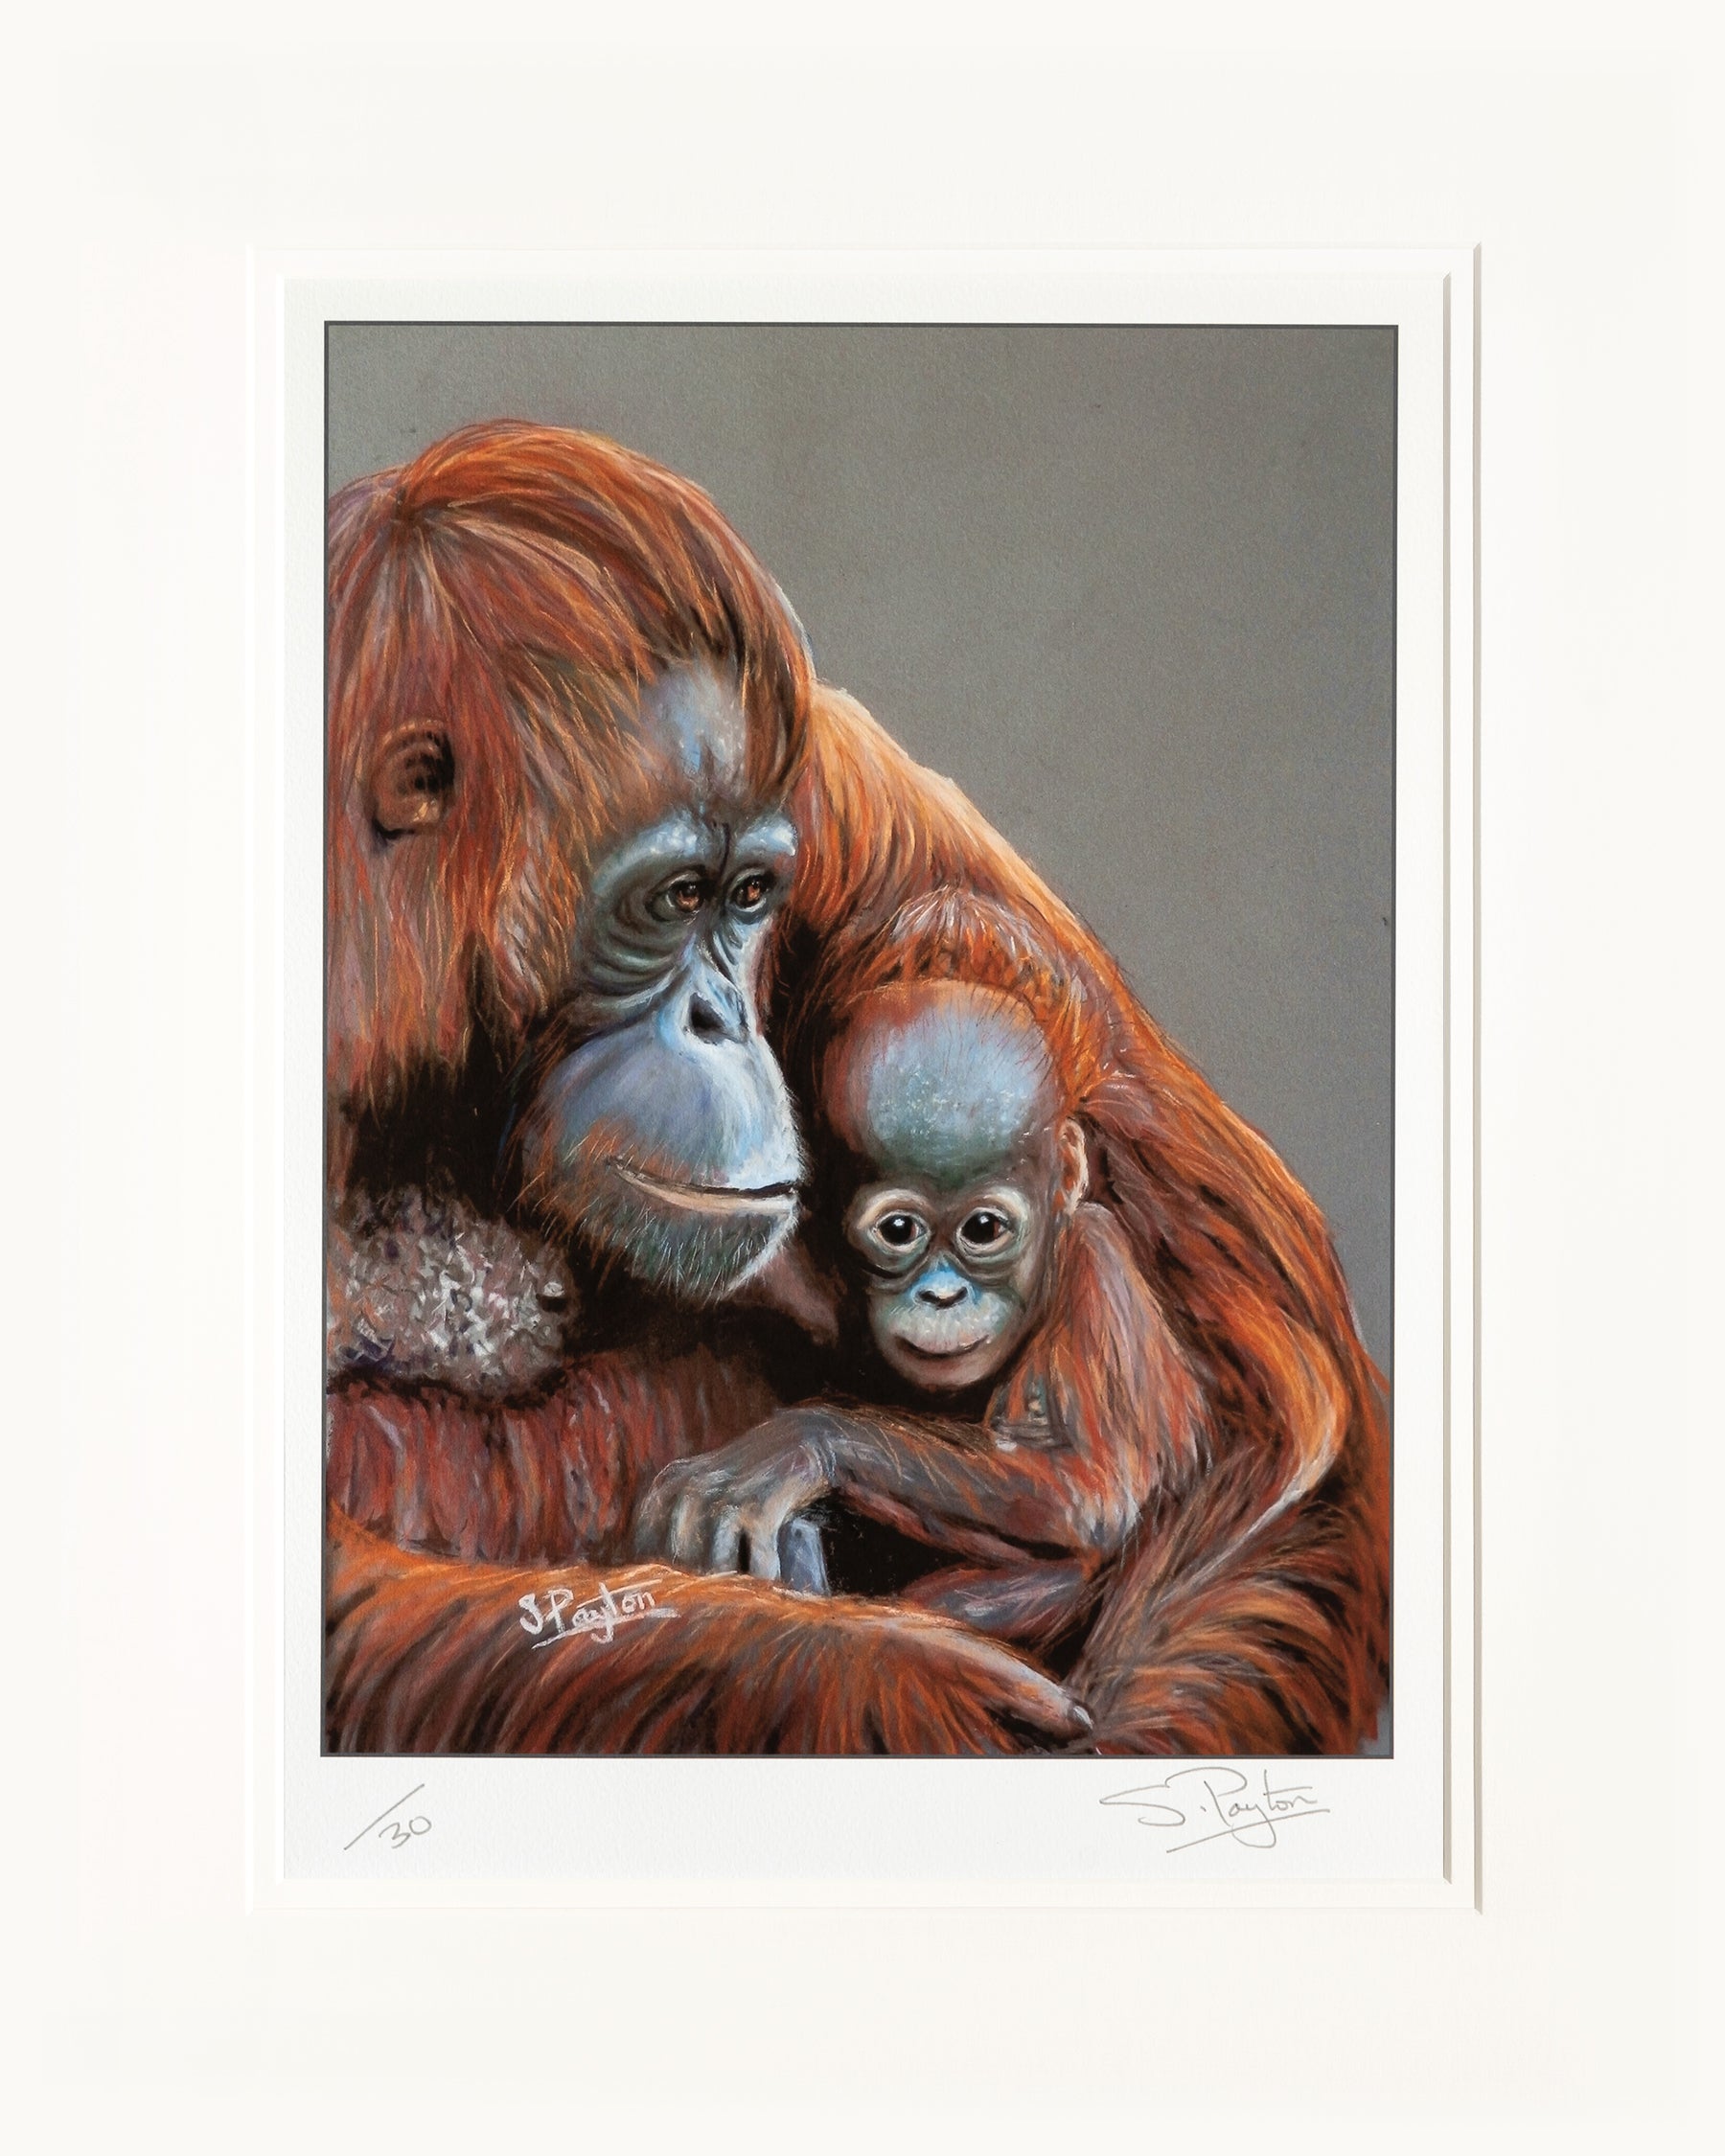 Protect Me limited edition print by Sue Payton